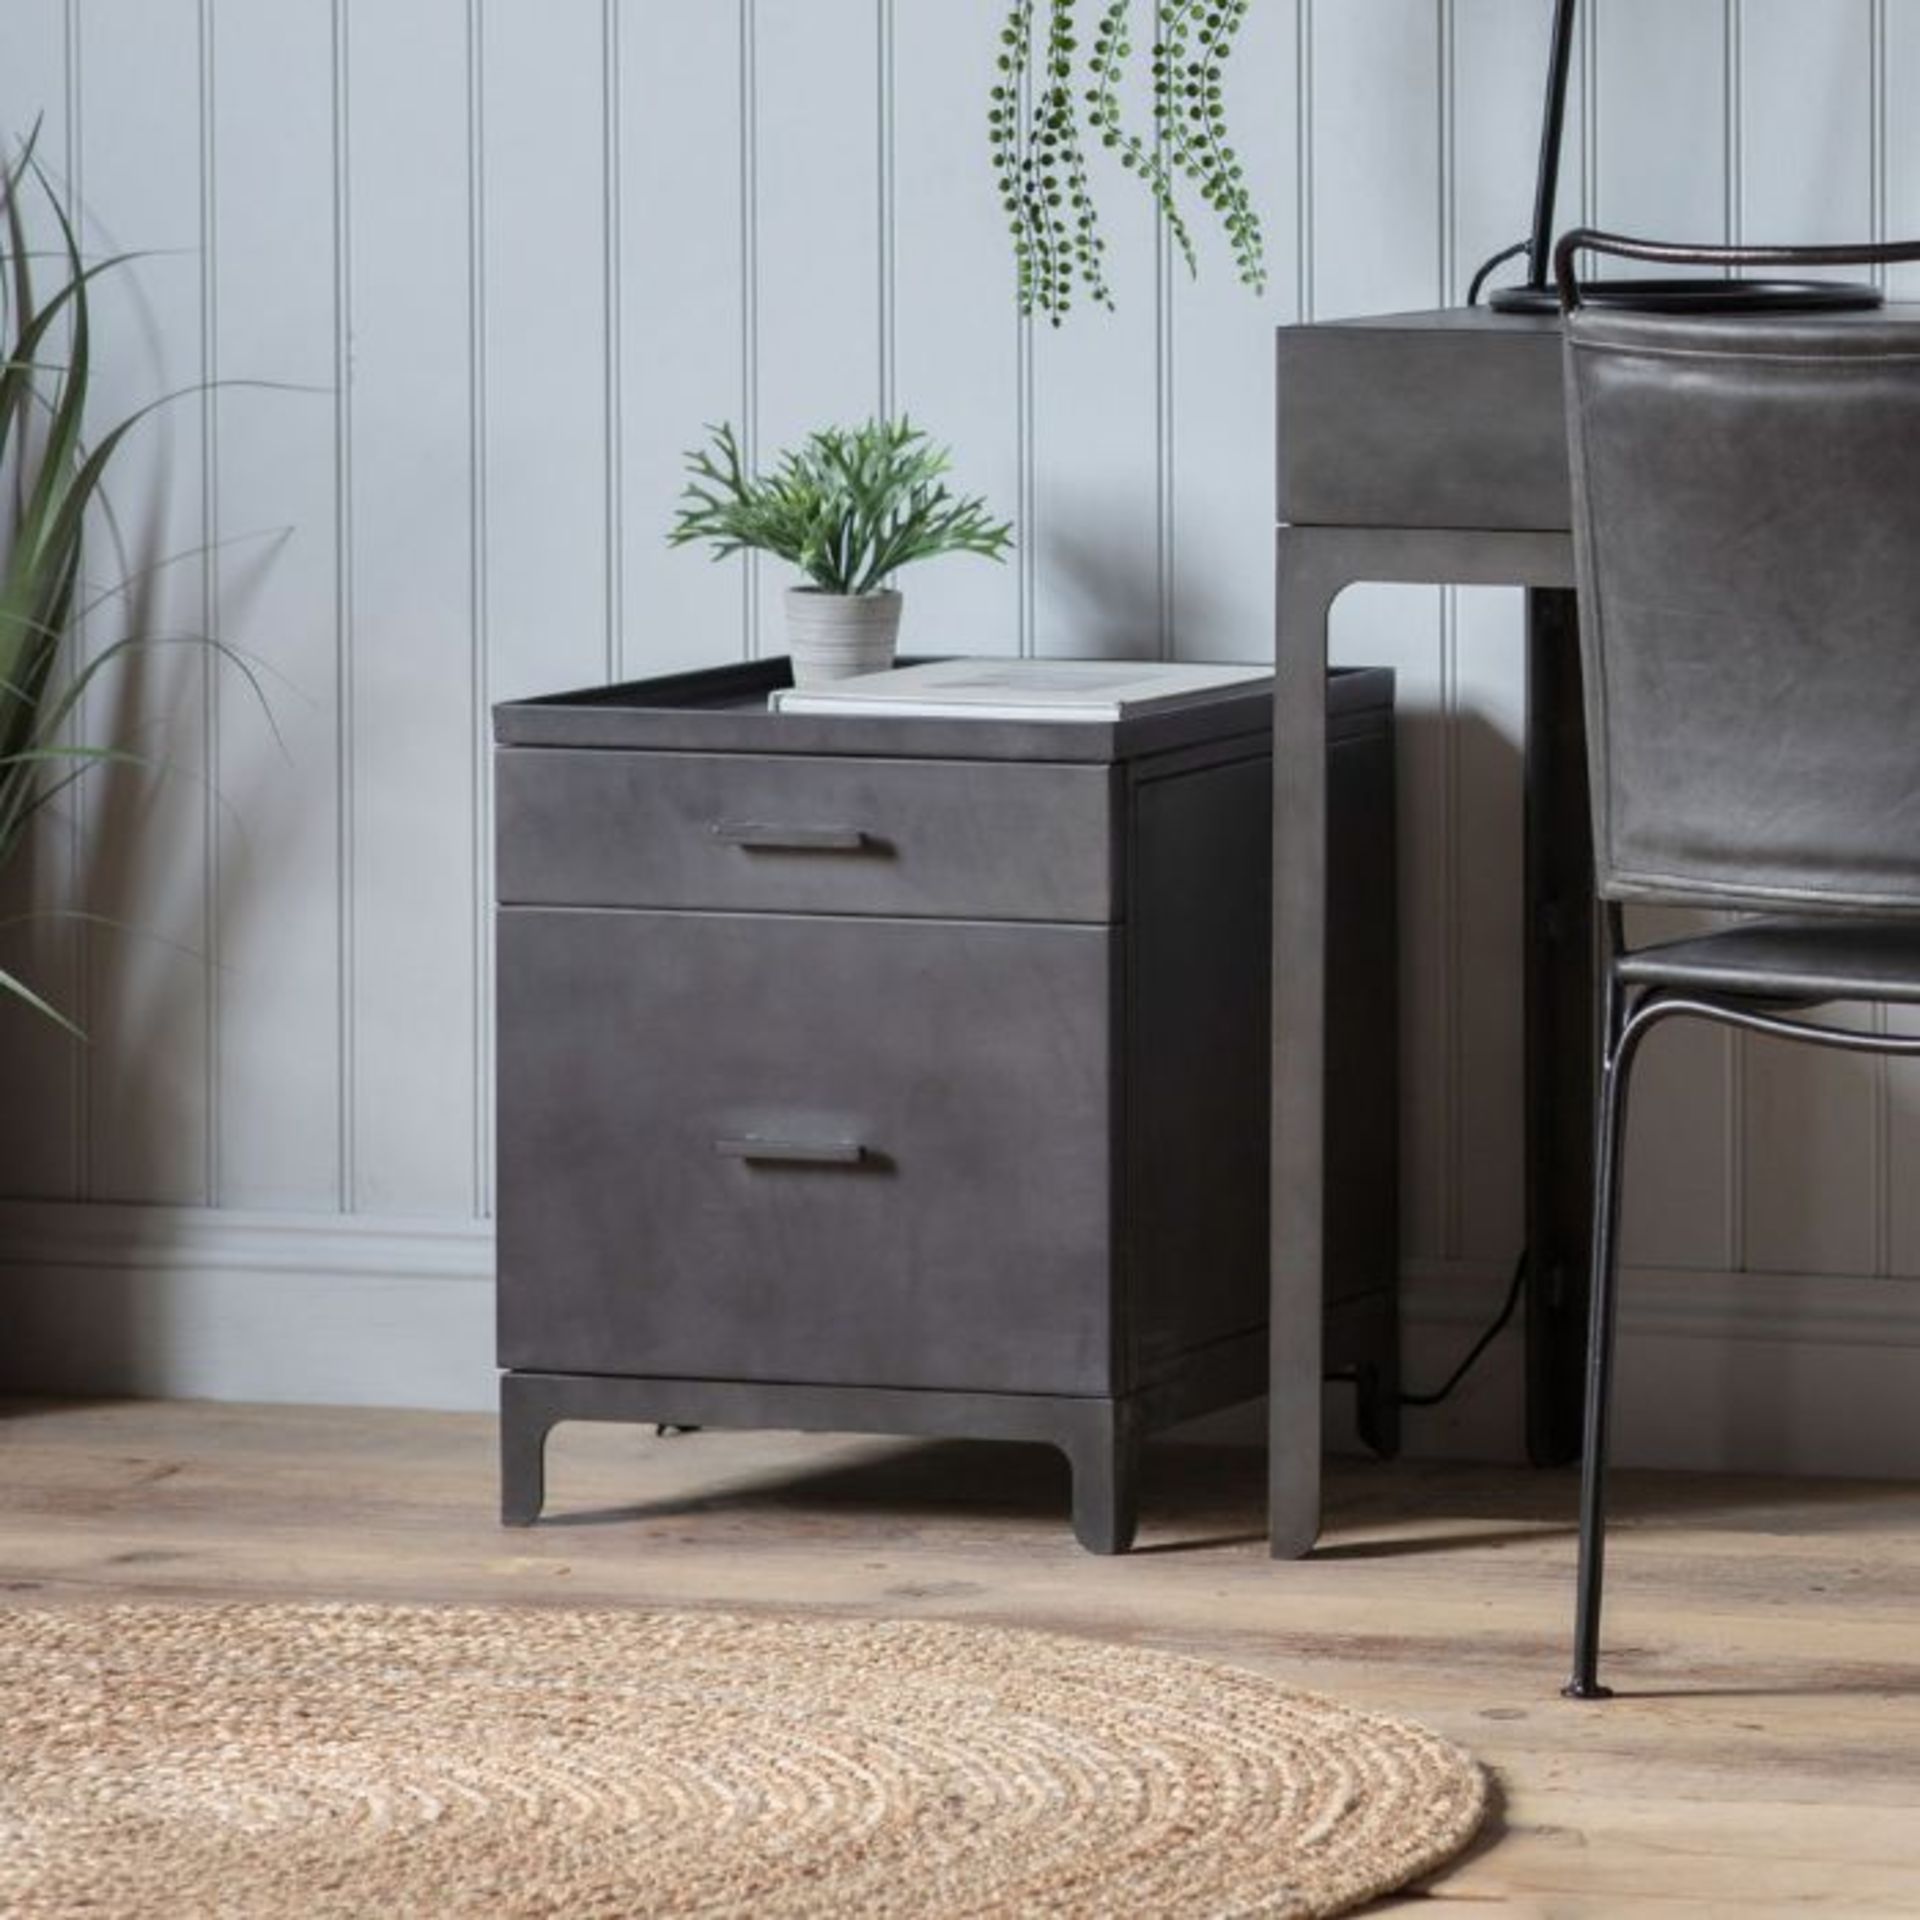 The stunning Ottinge two-drawer side table from Gallery Interiors adds style and practicality to - Image 3 of 3